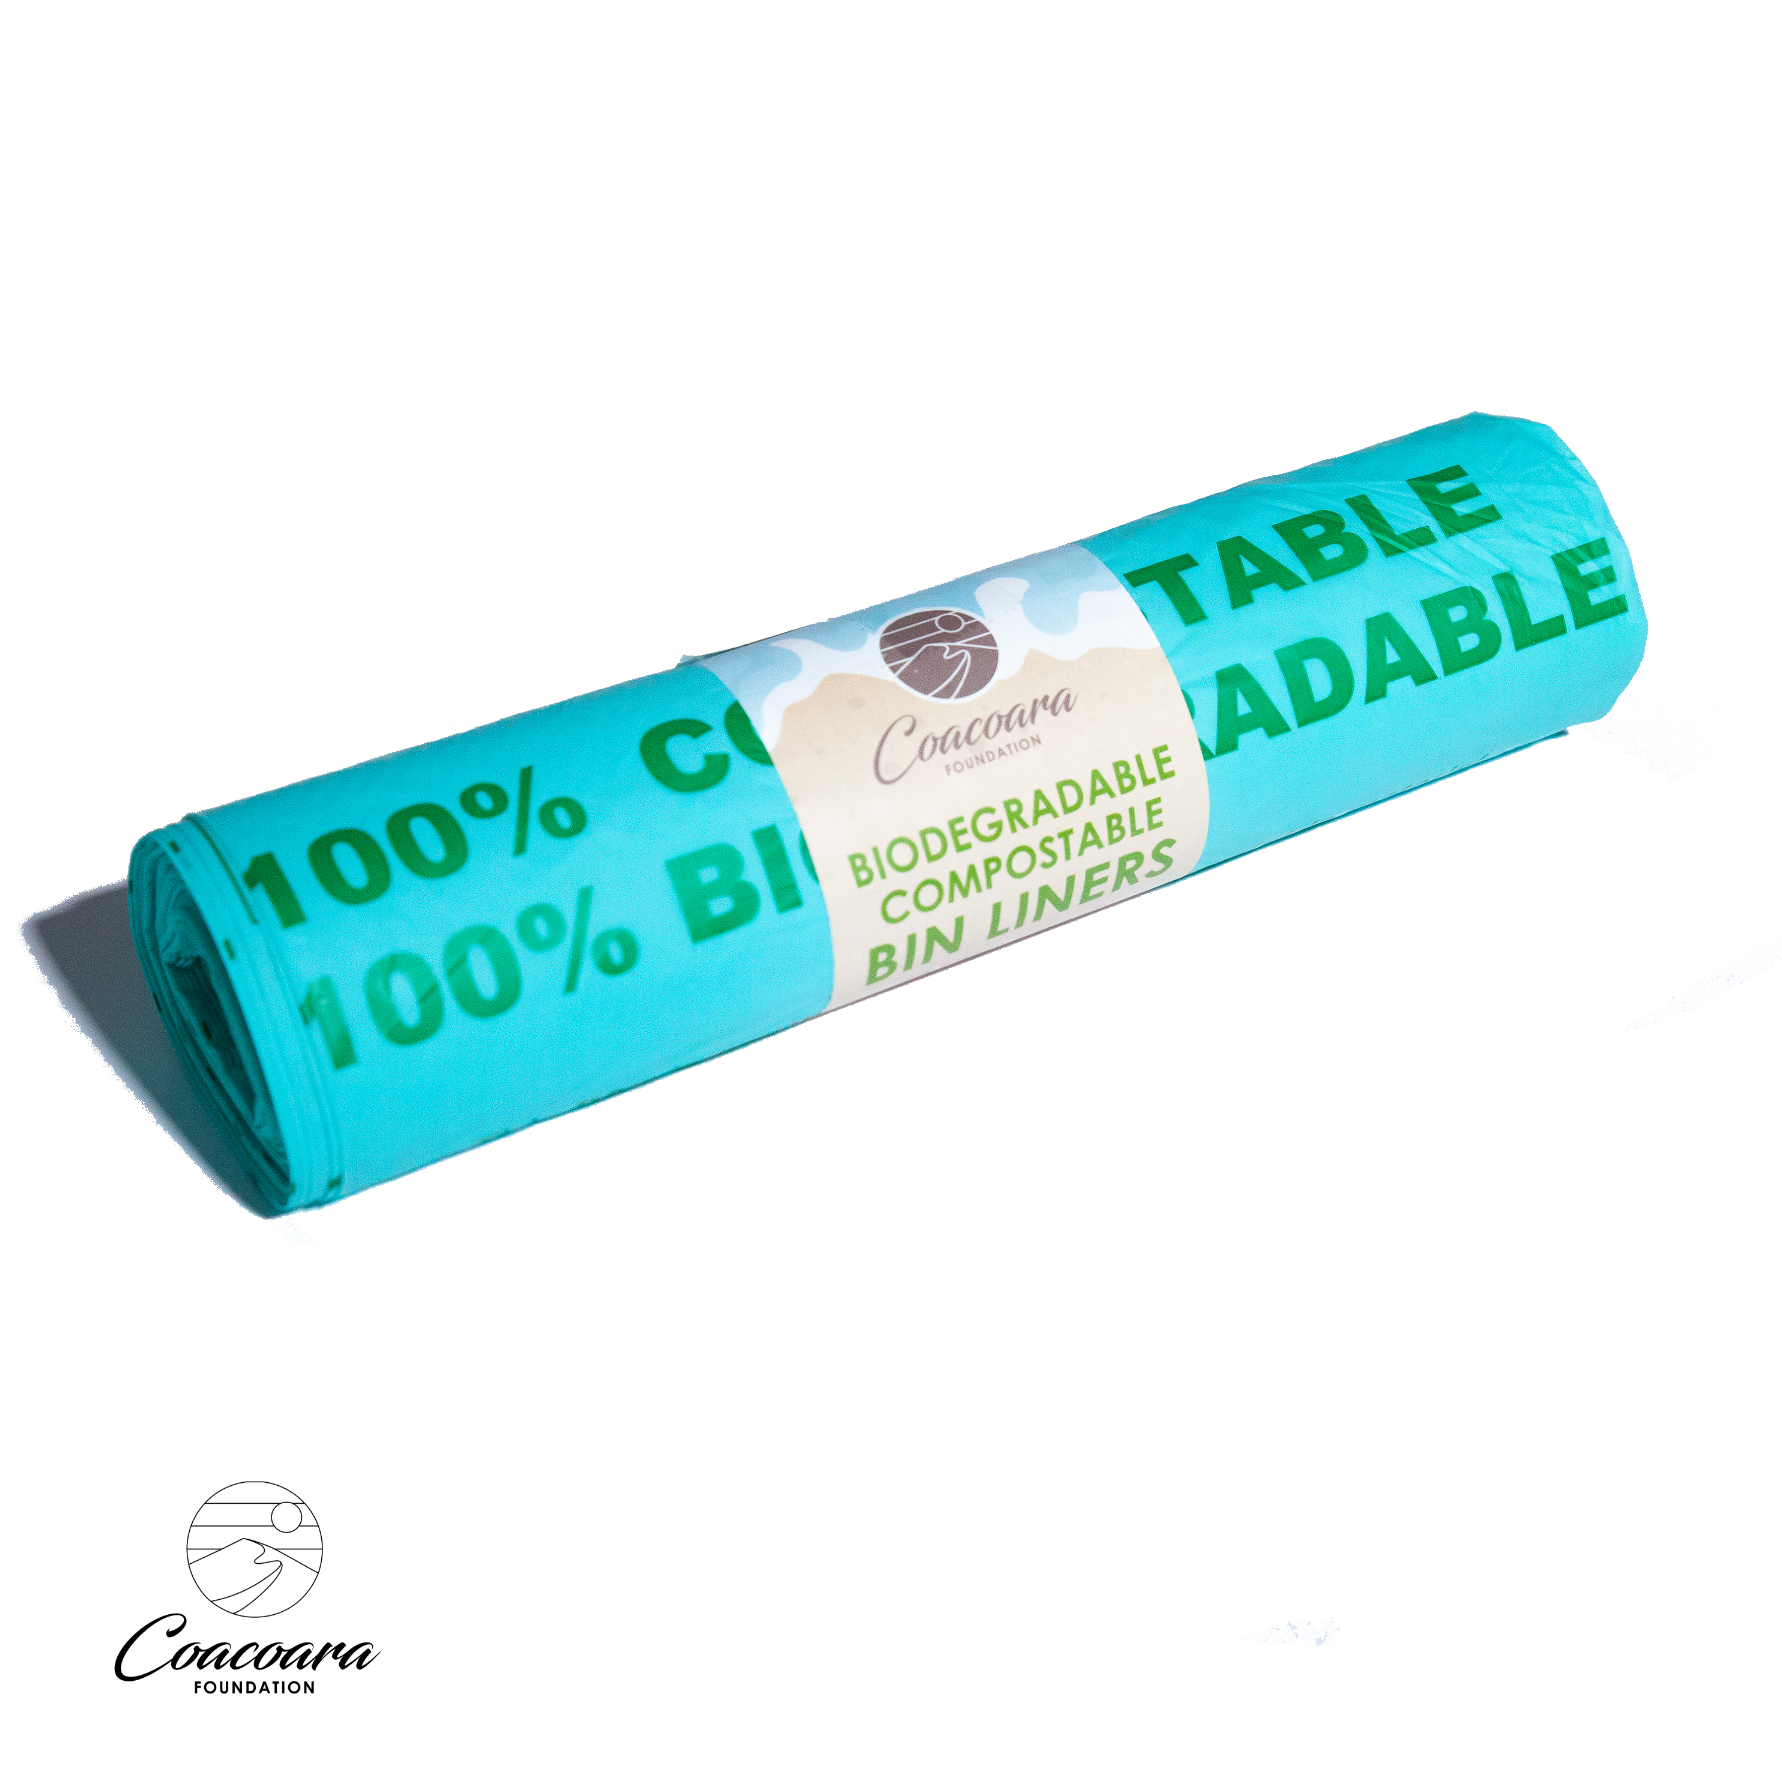 Biodegradable Compostable Bin Liners 50 litres